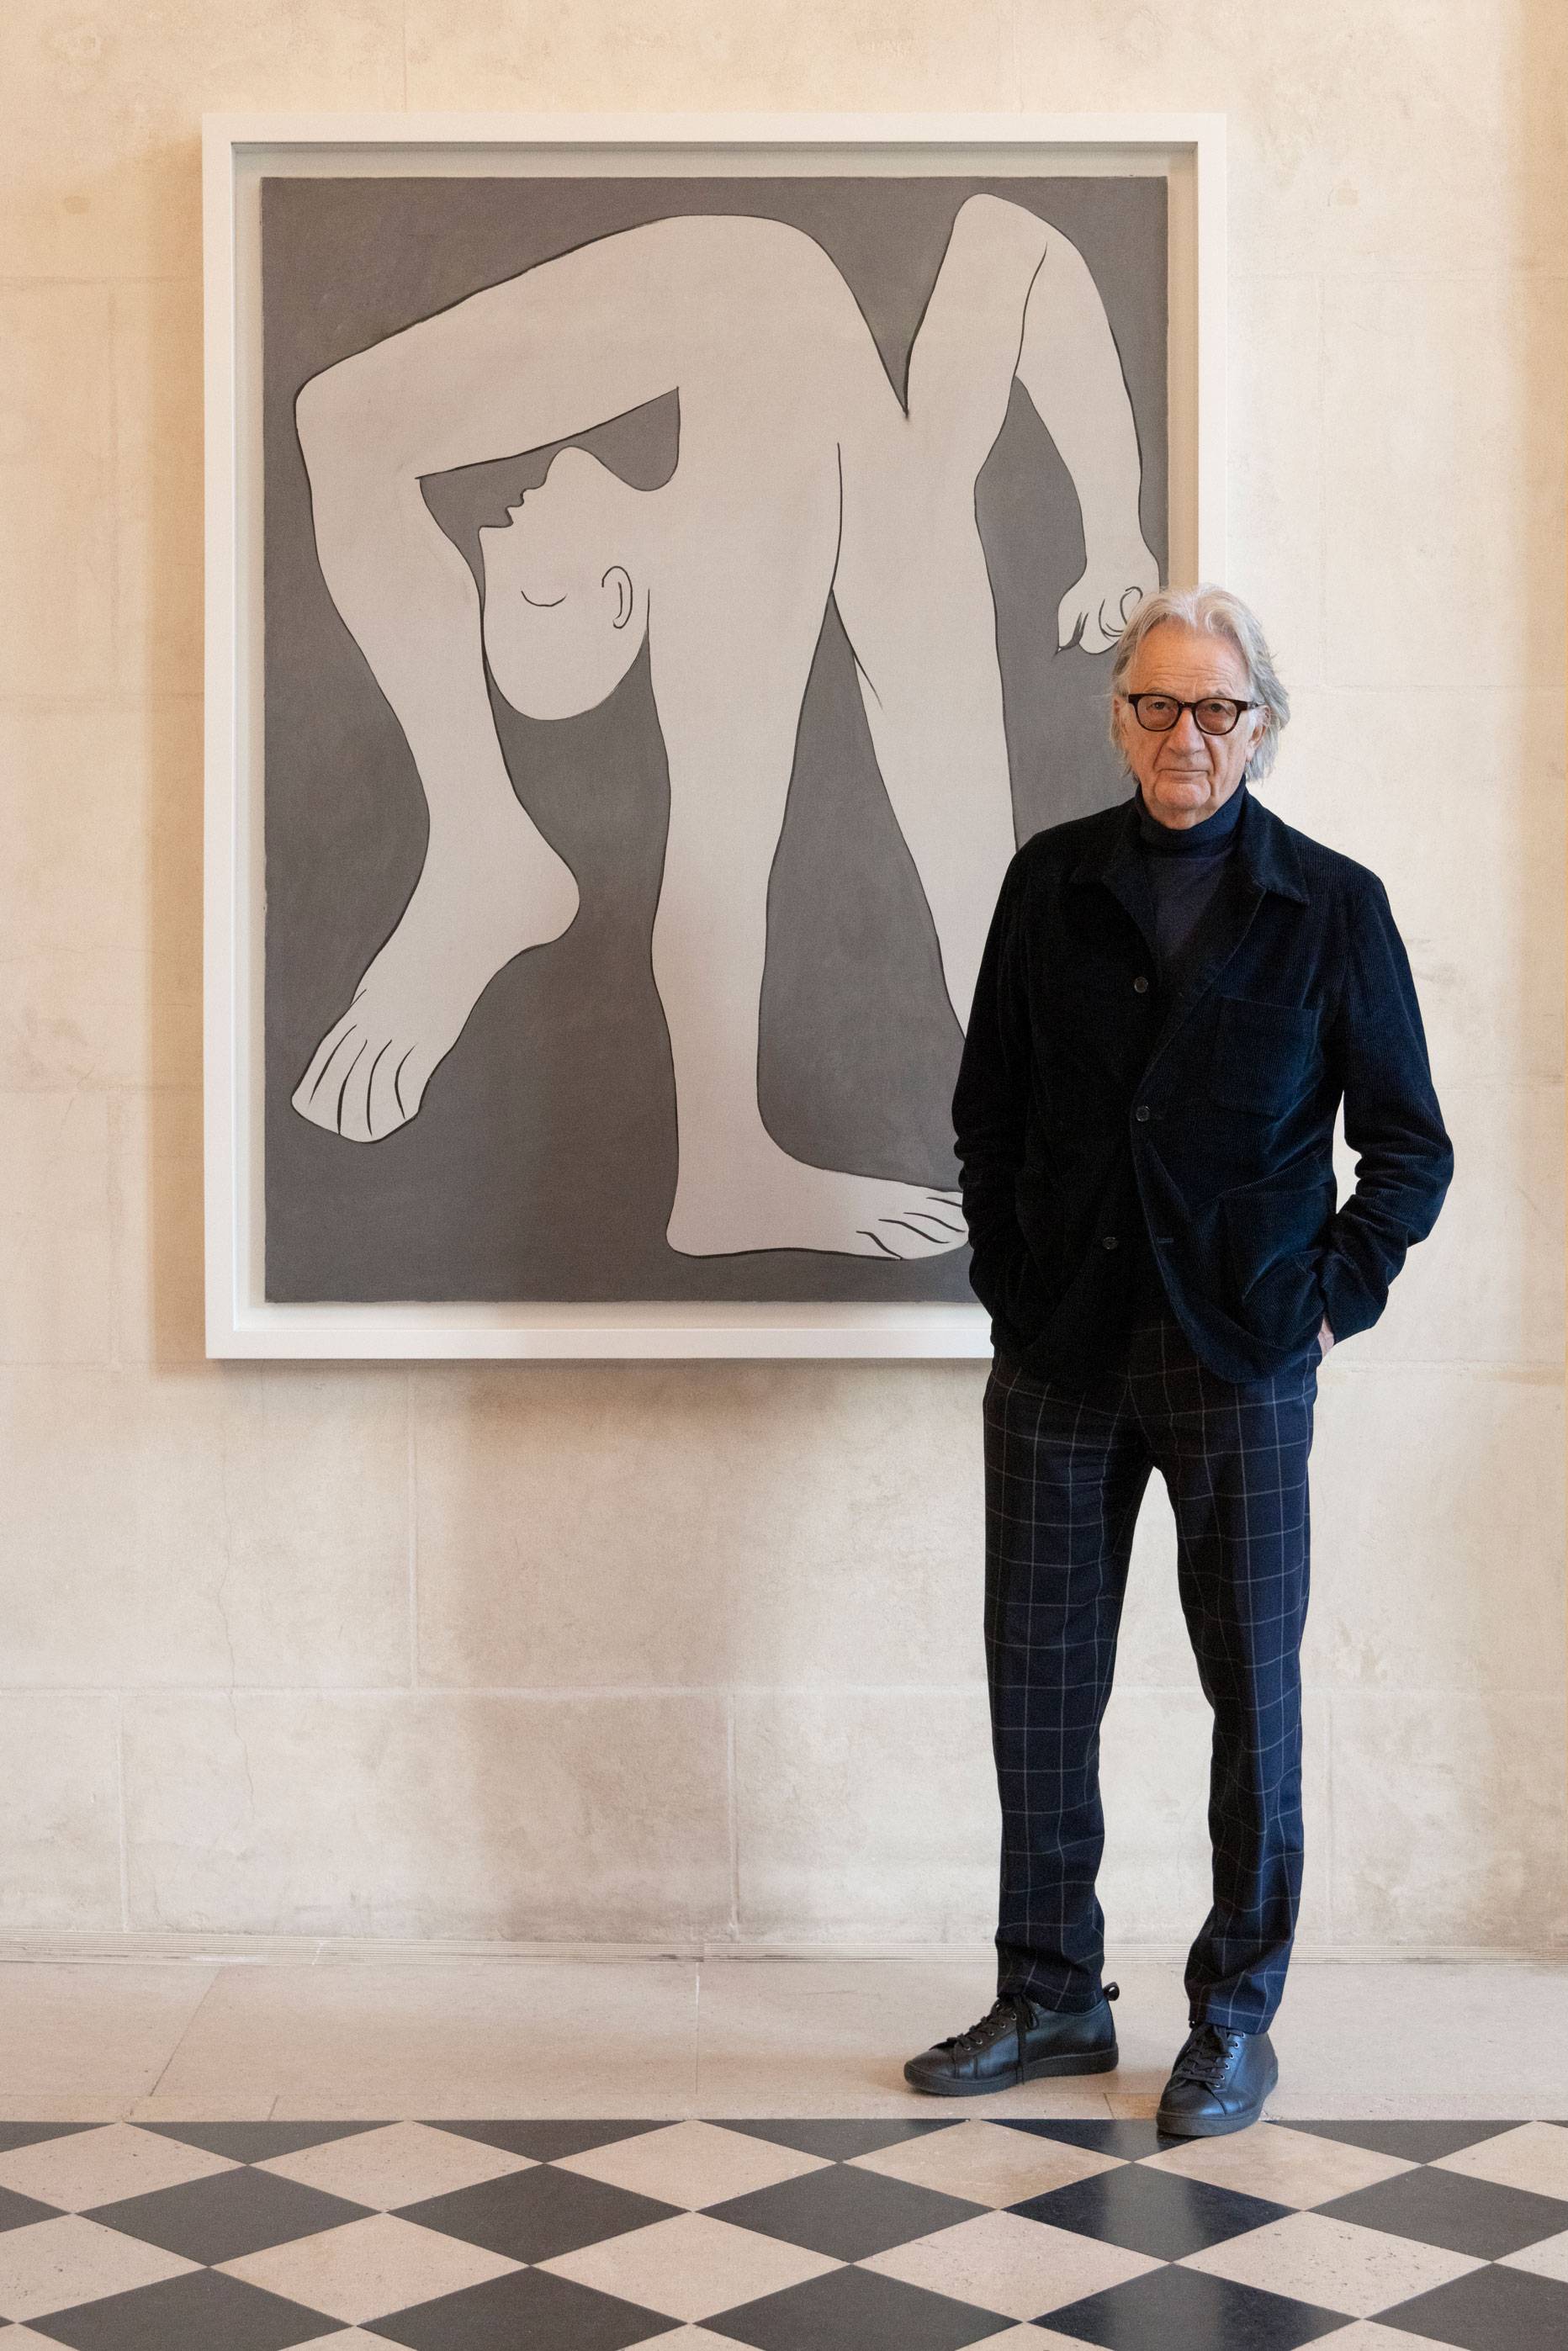 Paul Smith’s picks from the Musée Picasso